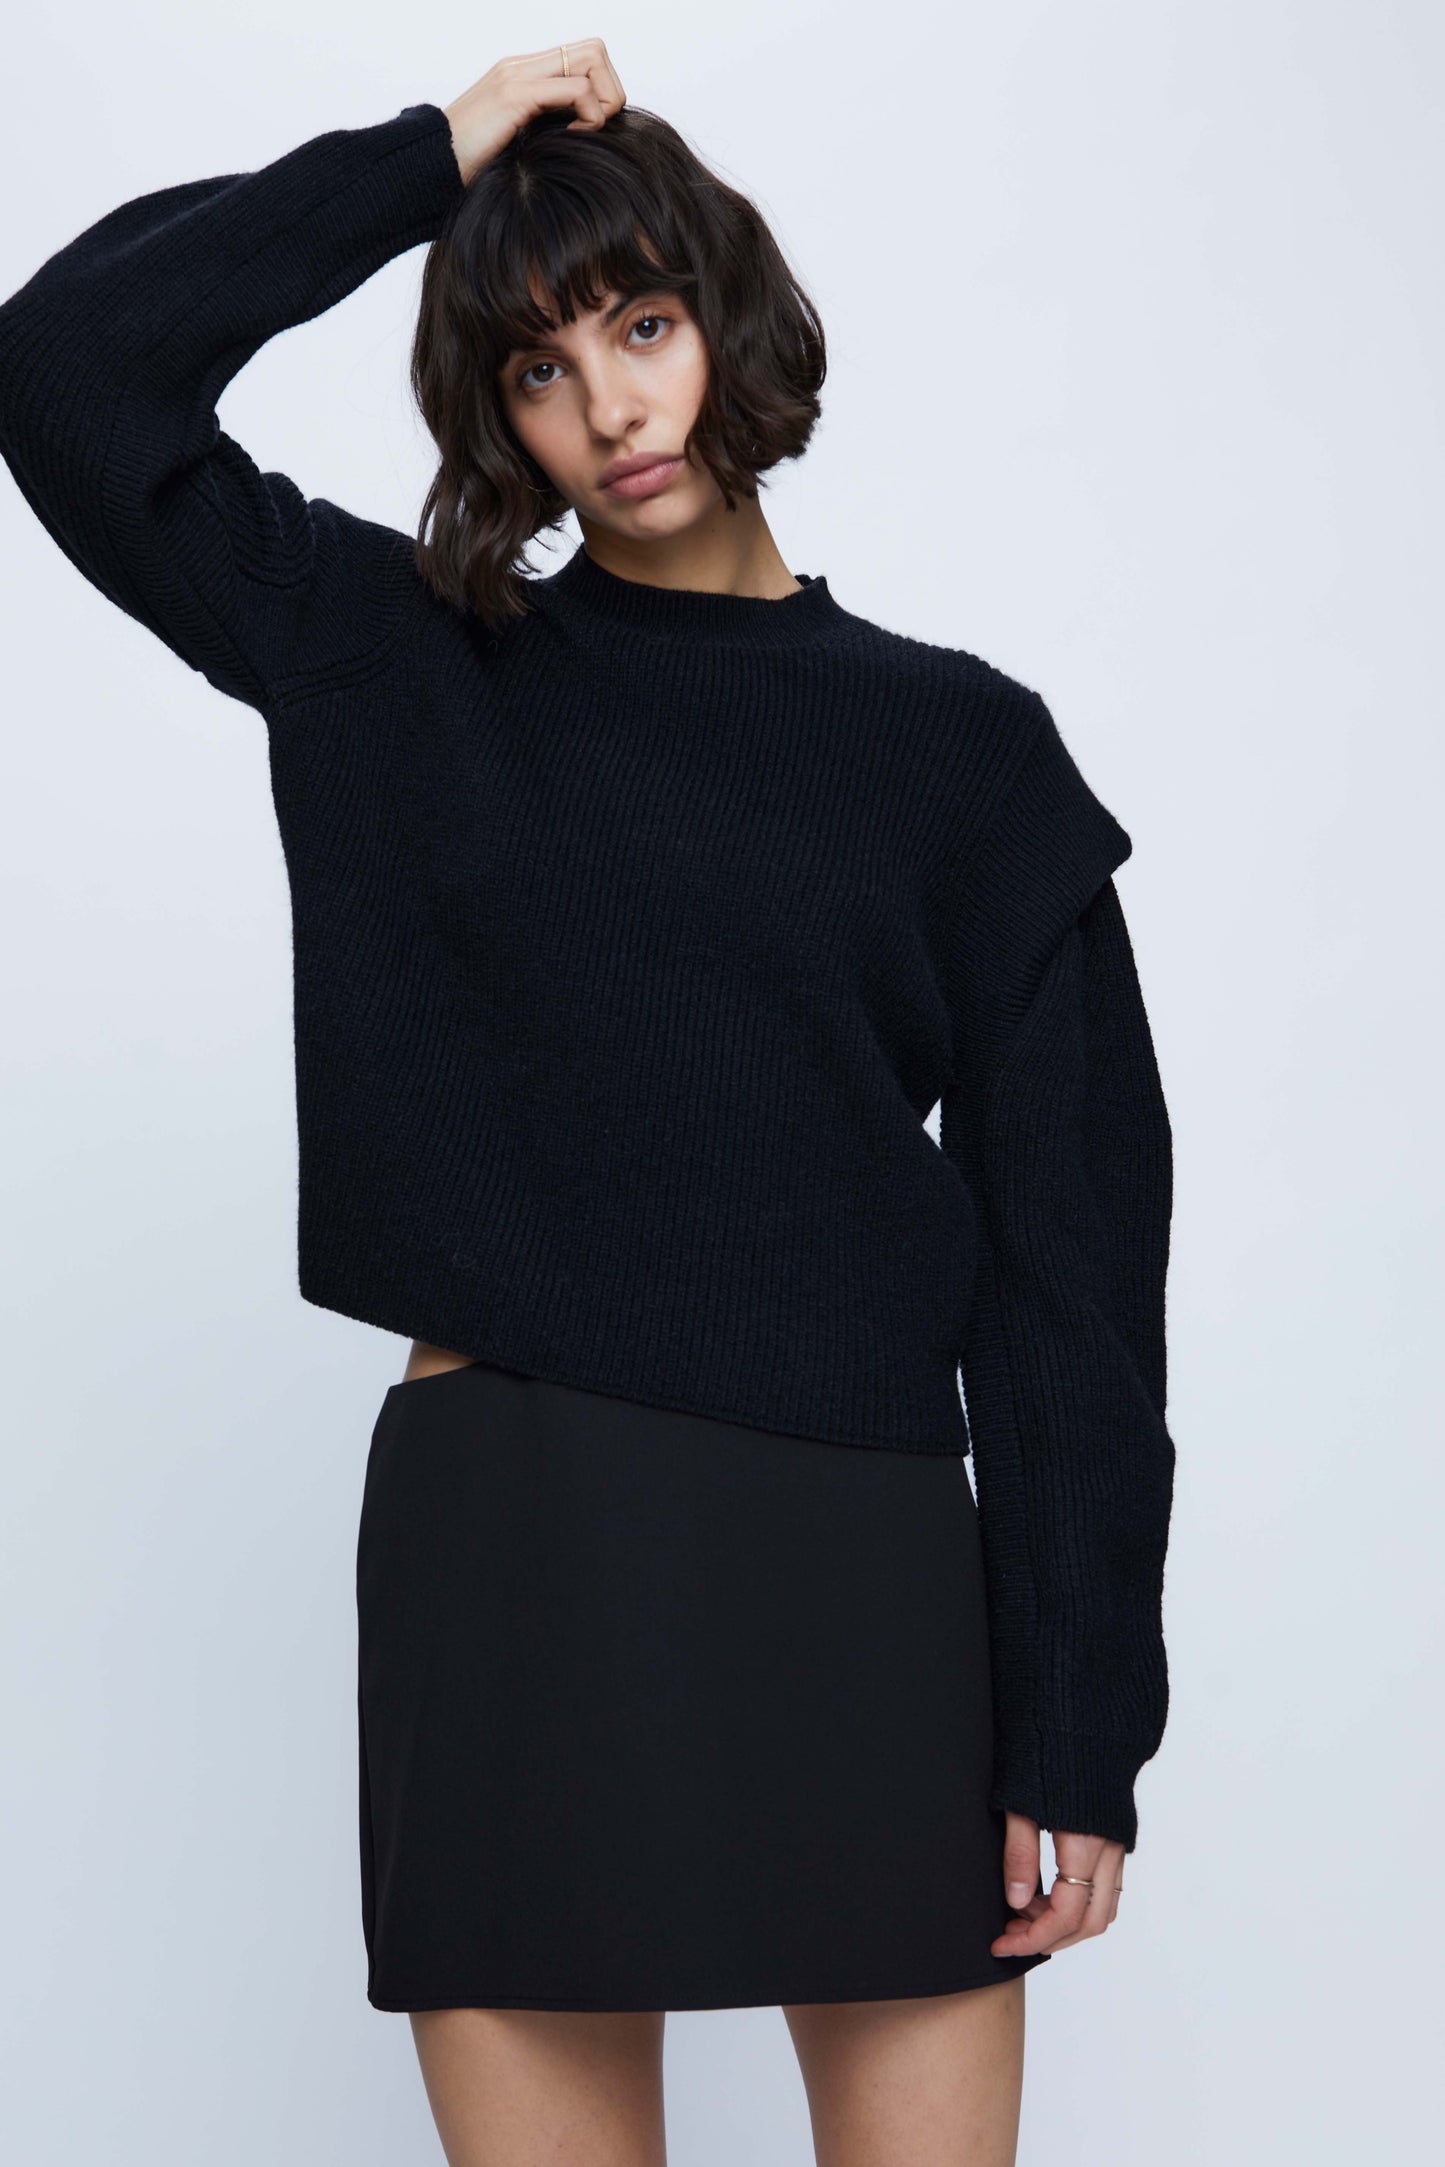 Black knitted sweater with shoulder detail